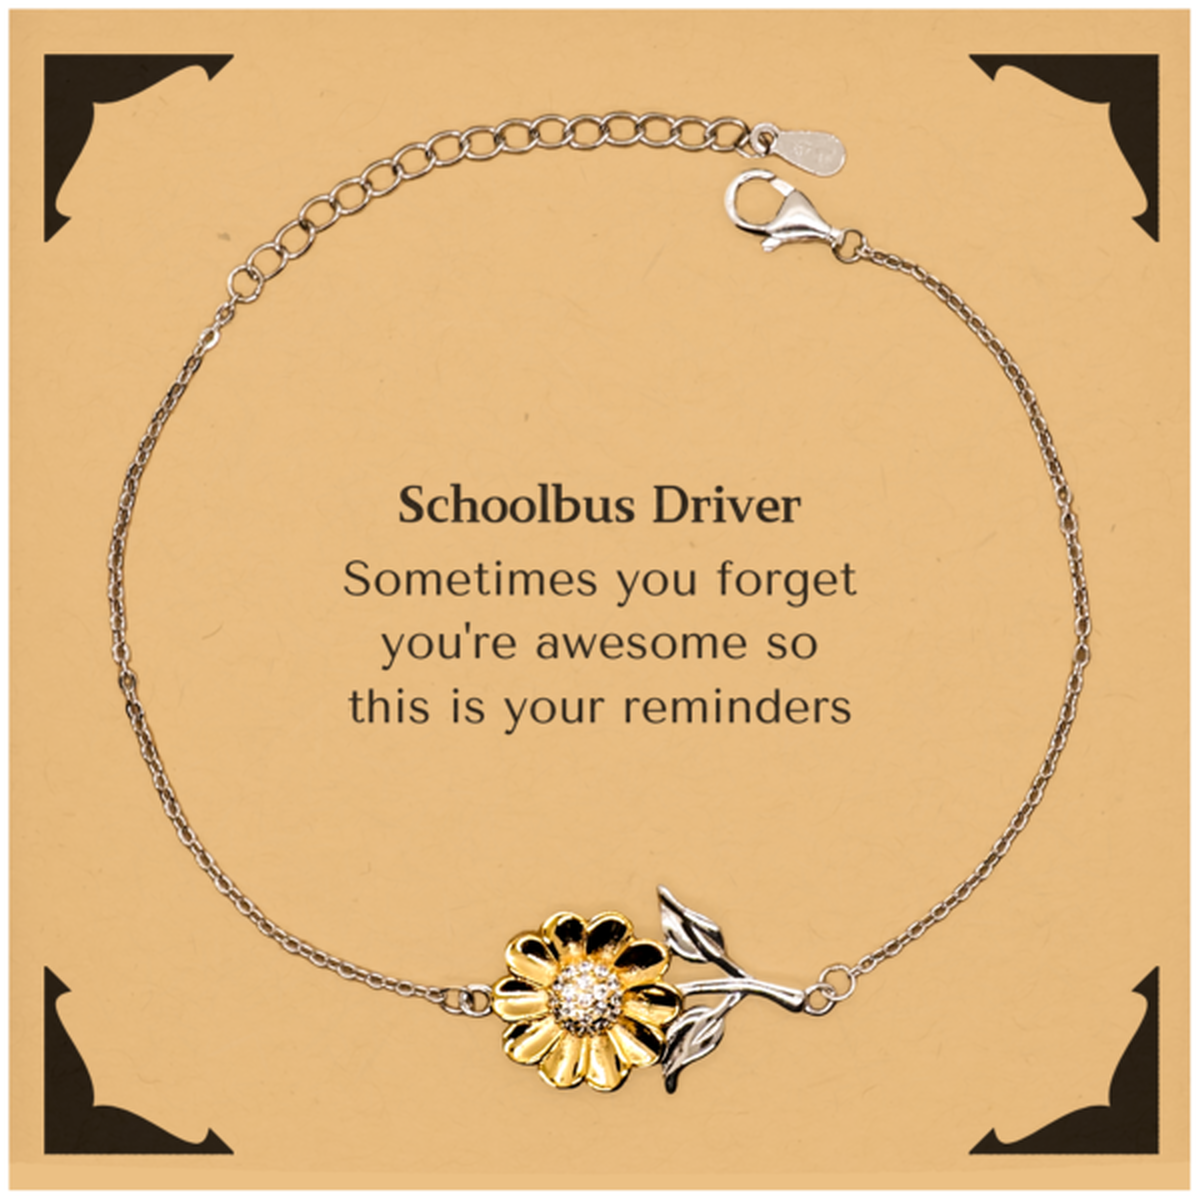 Sentimental Schoolbus Driver Sunflower Bracelet, Schoolbus Driver Sometimes you forget you're awesome so this is your reminders, Graduation Christmas Birthday Gifts for Schoolbus Driver, Men, Women, Coworkers